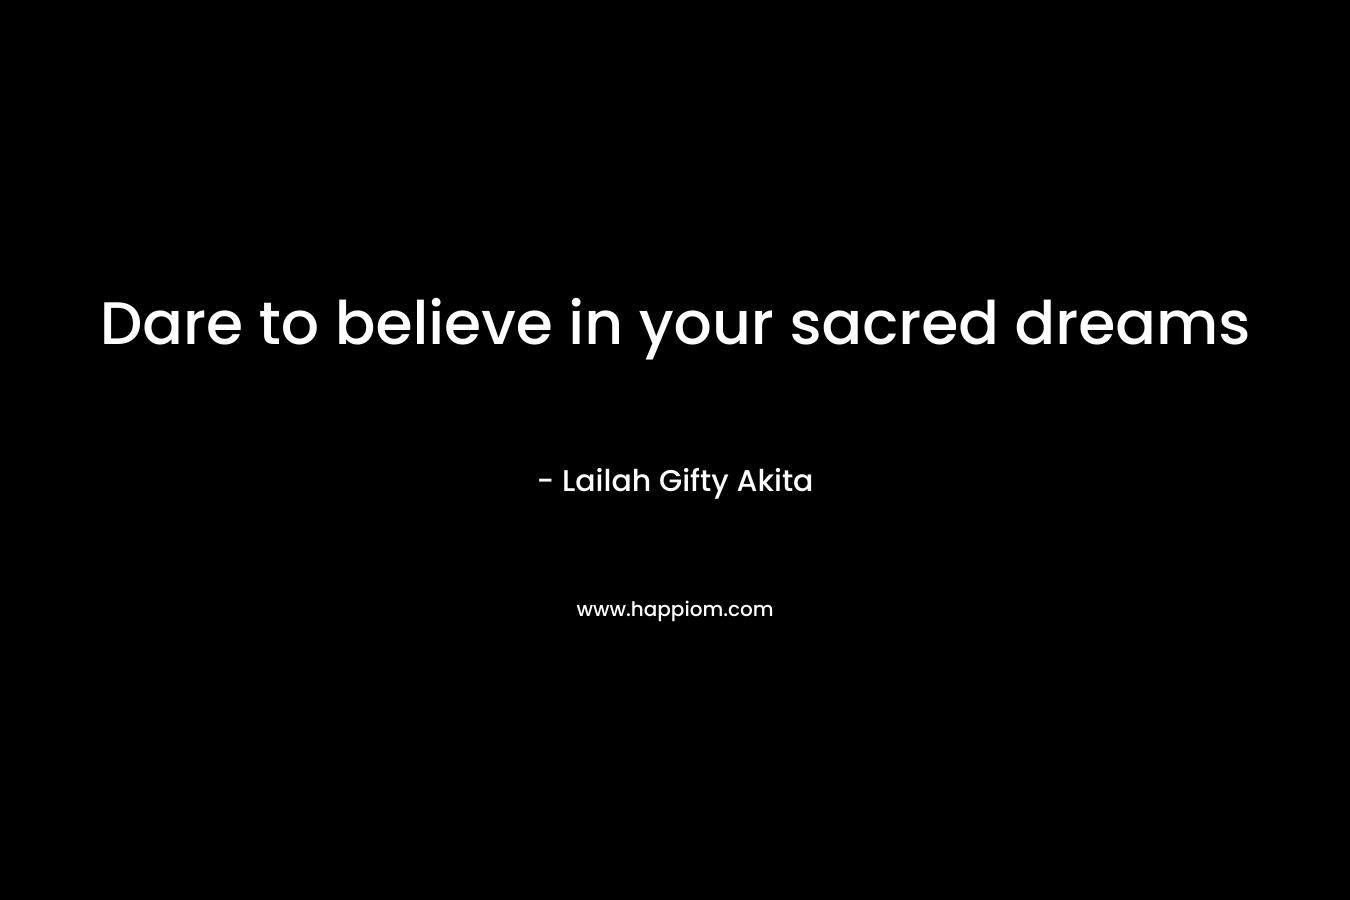 Dare to believe in your sacred dreams